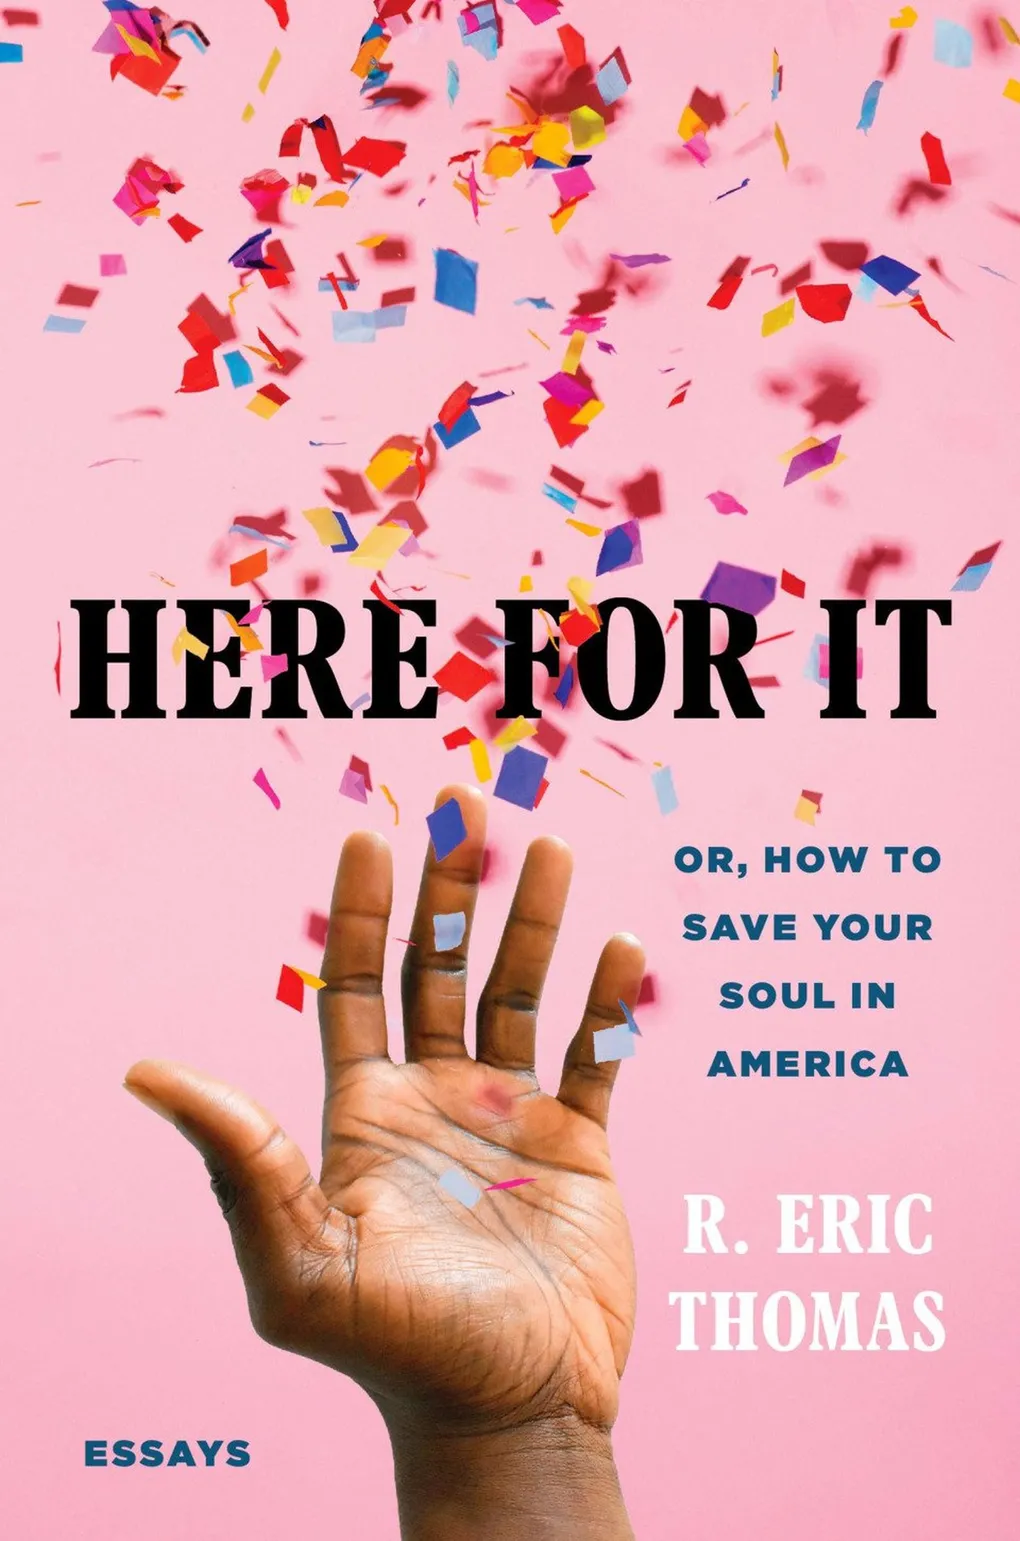 Book Review: Here For It by R. Eric Thomas